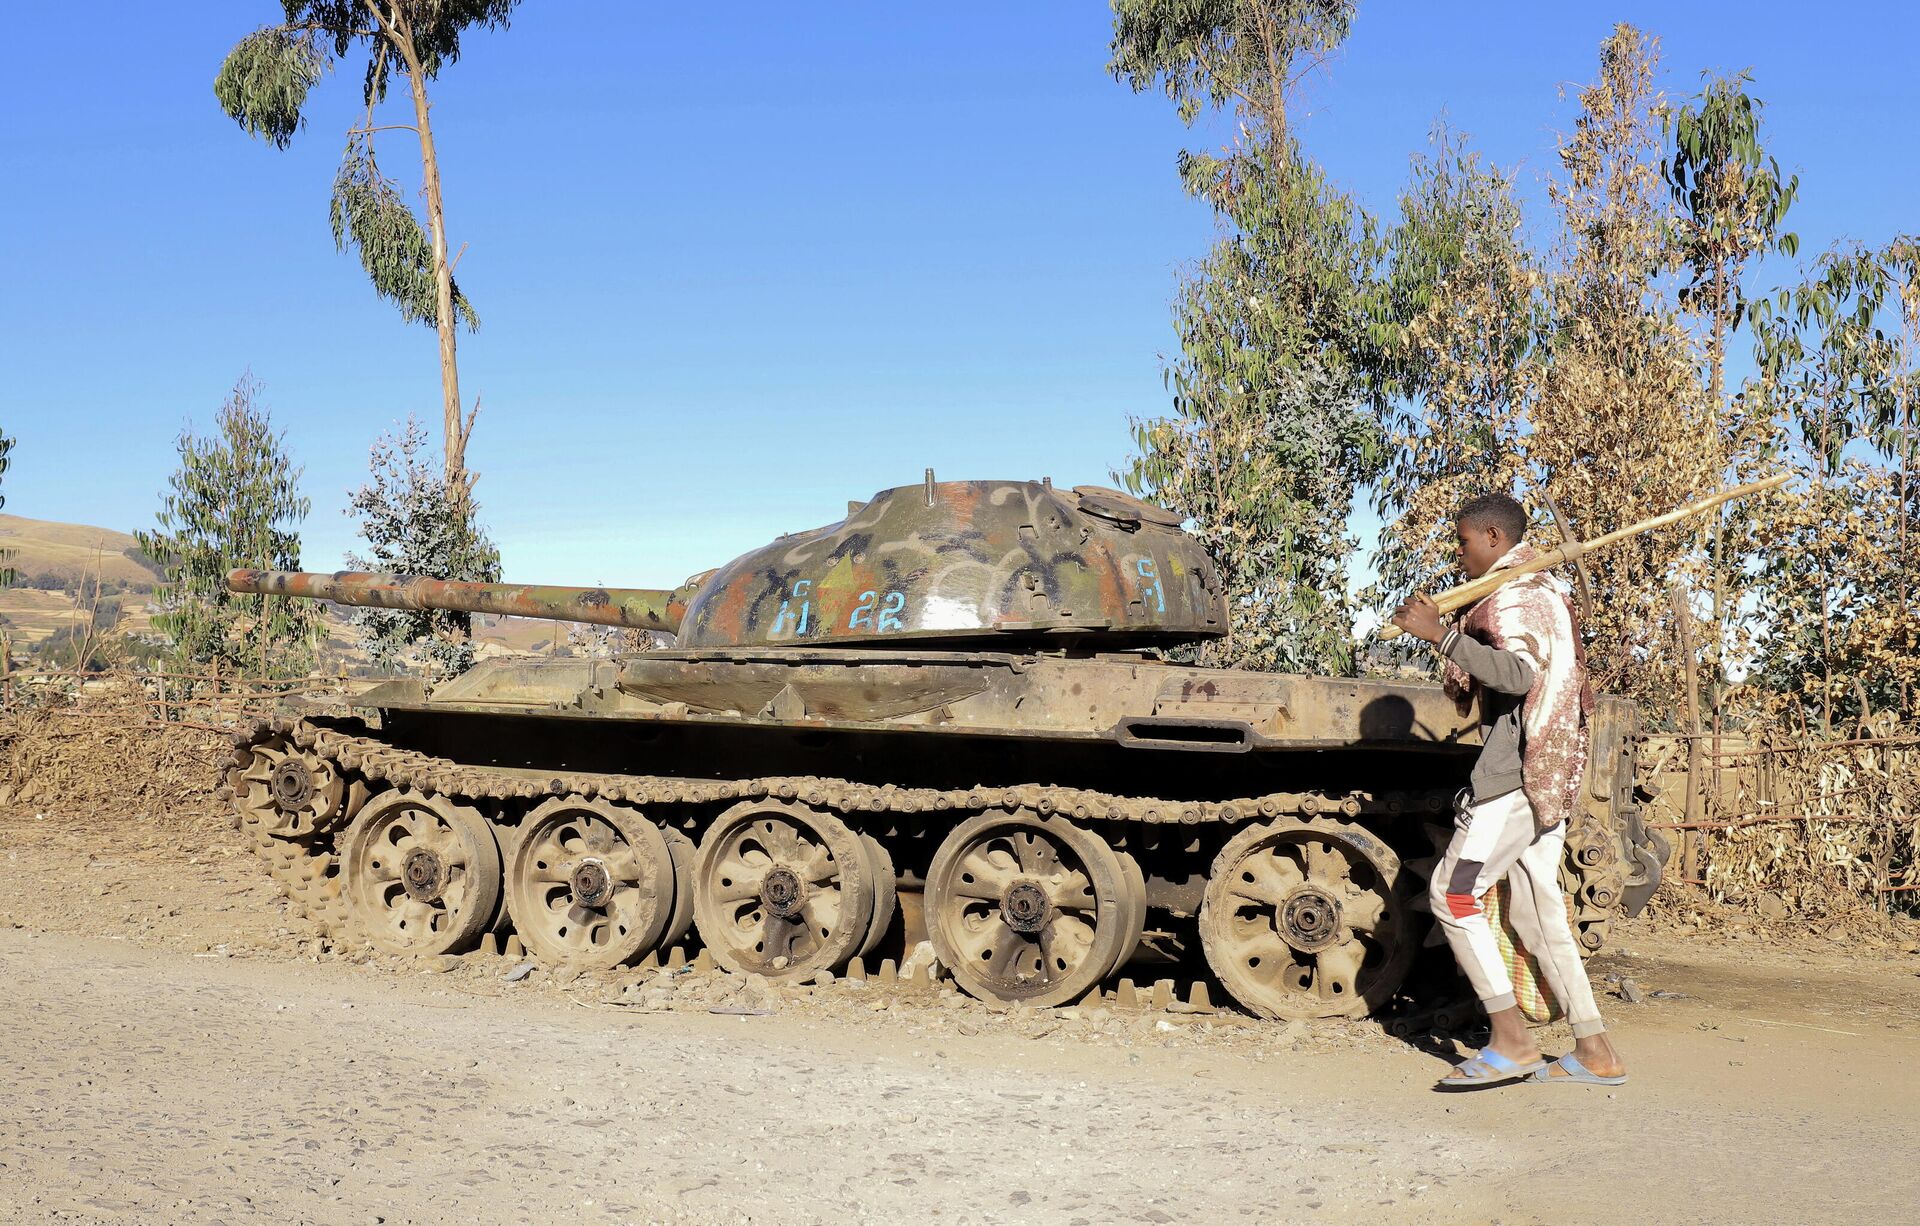 A  farmer walks past a military tank destroyed recently during fighting between the Ethiopian National Defense Force (ENDF) and the Tigray People's Liberation Front (TPLF) in Damot Kebele of Amhara region, Ethiopia December 7, 2021. Picture taken December 7, 2021. - Sputnik International, 1920, 14.12.2021